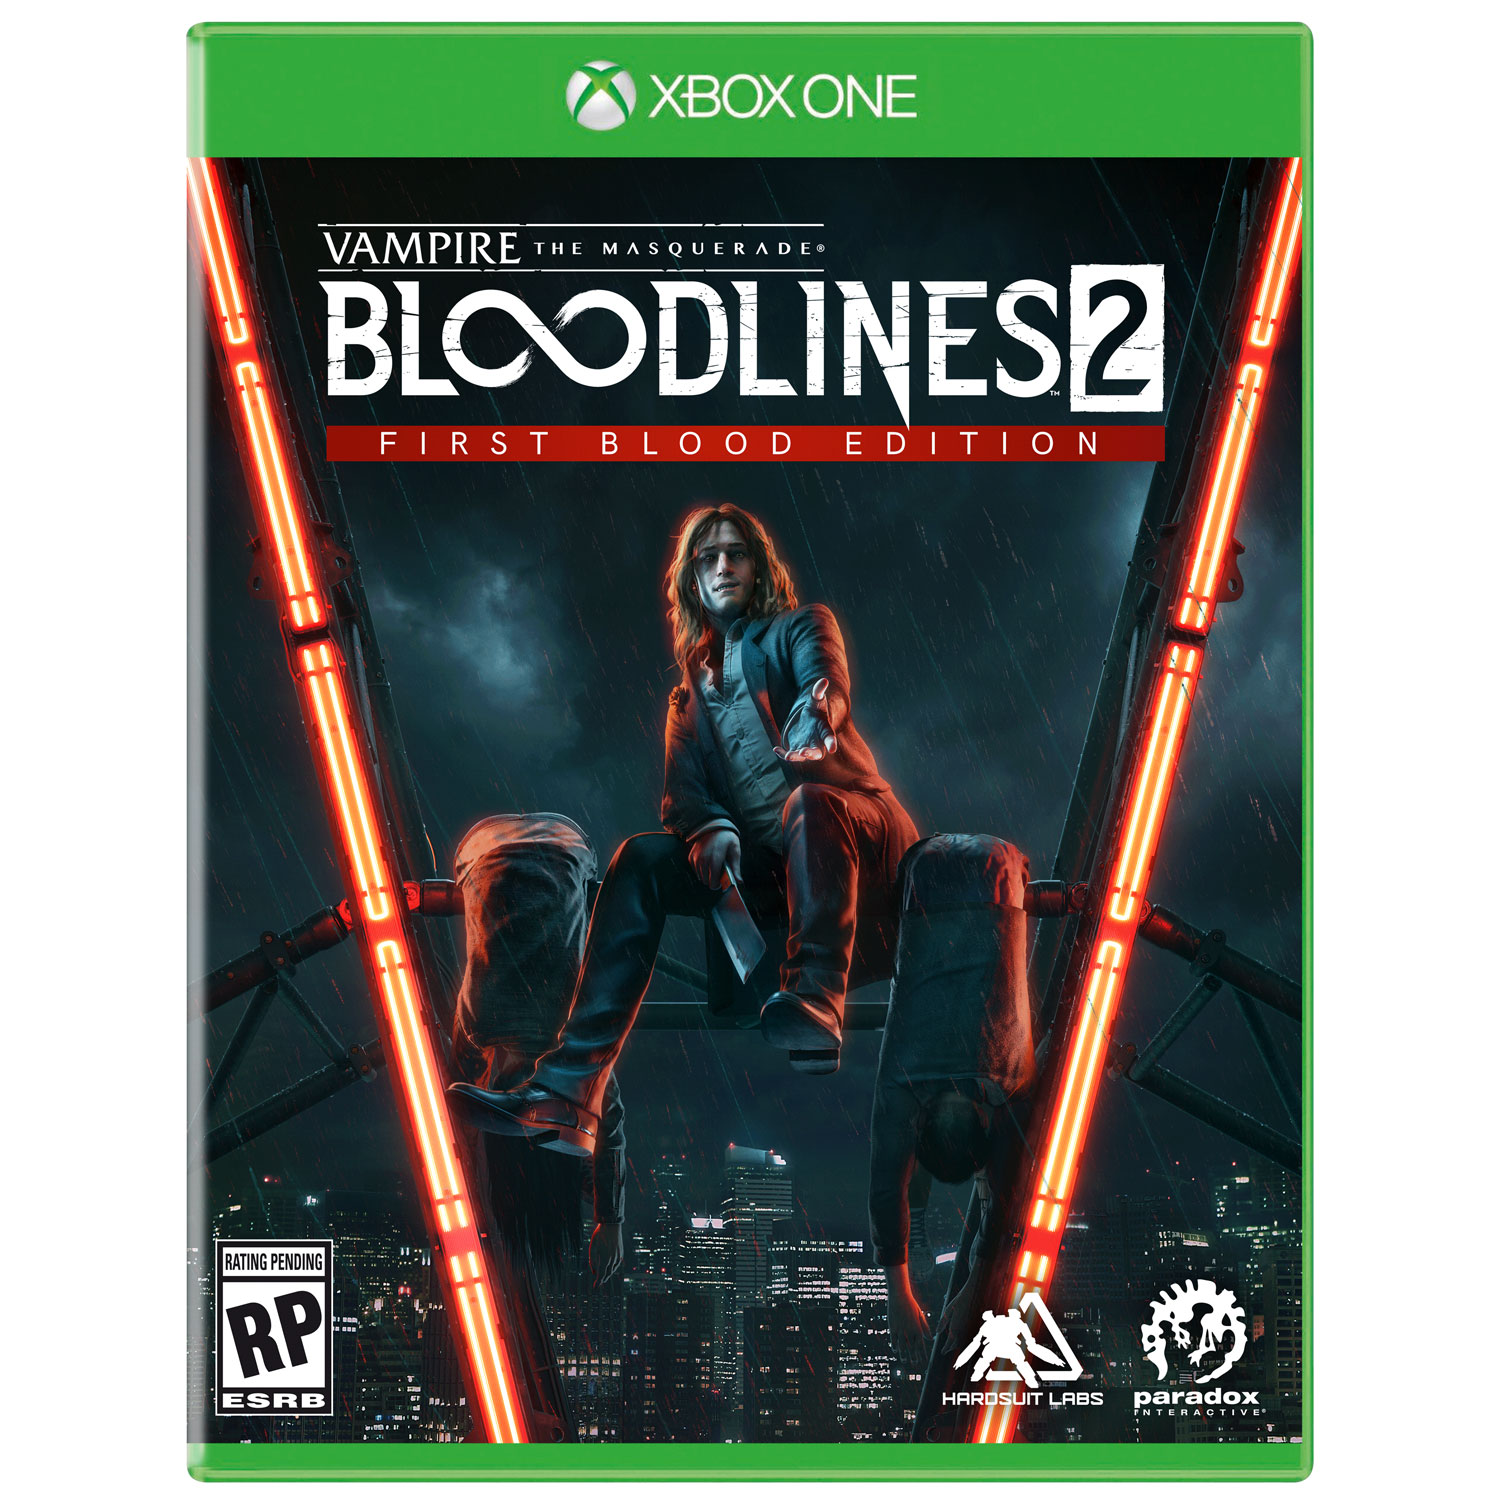 Vampire: The Masquerade - Bloodlines 2 First Blood Edition (Xbox One)